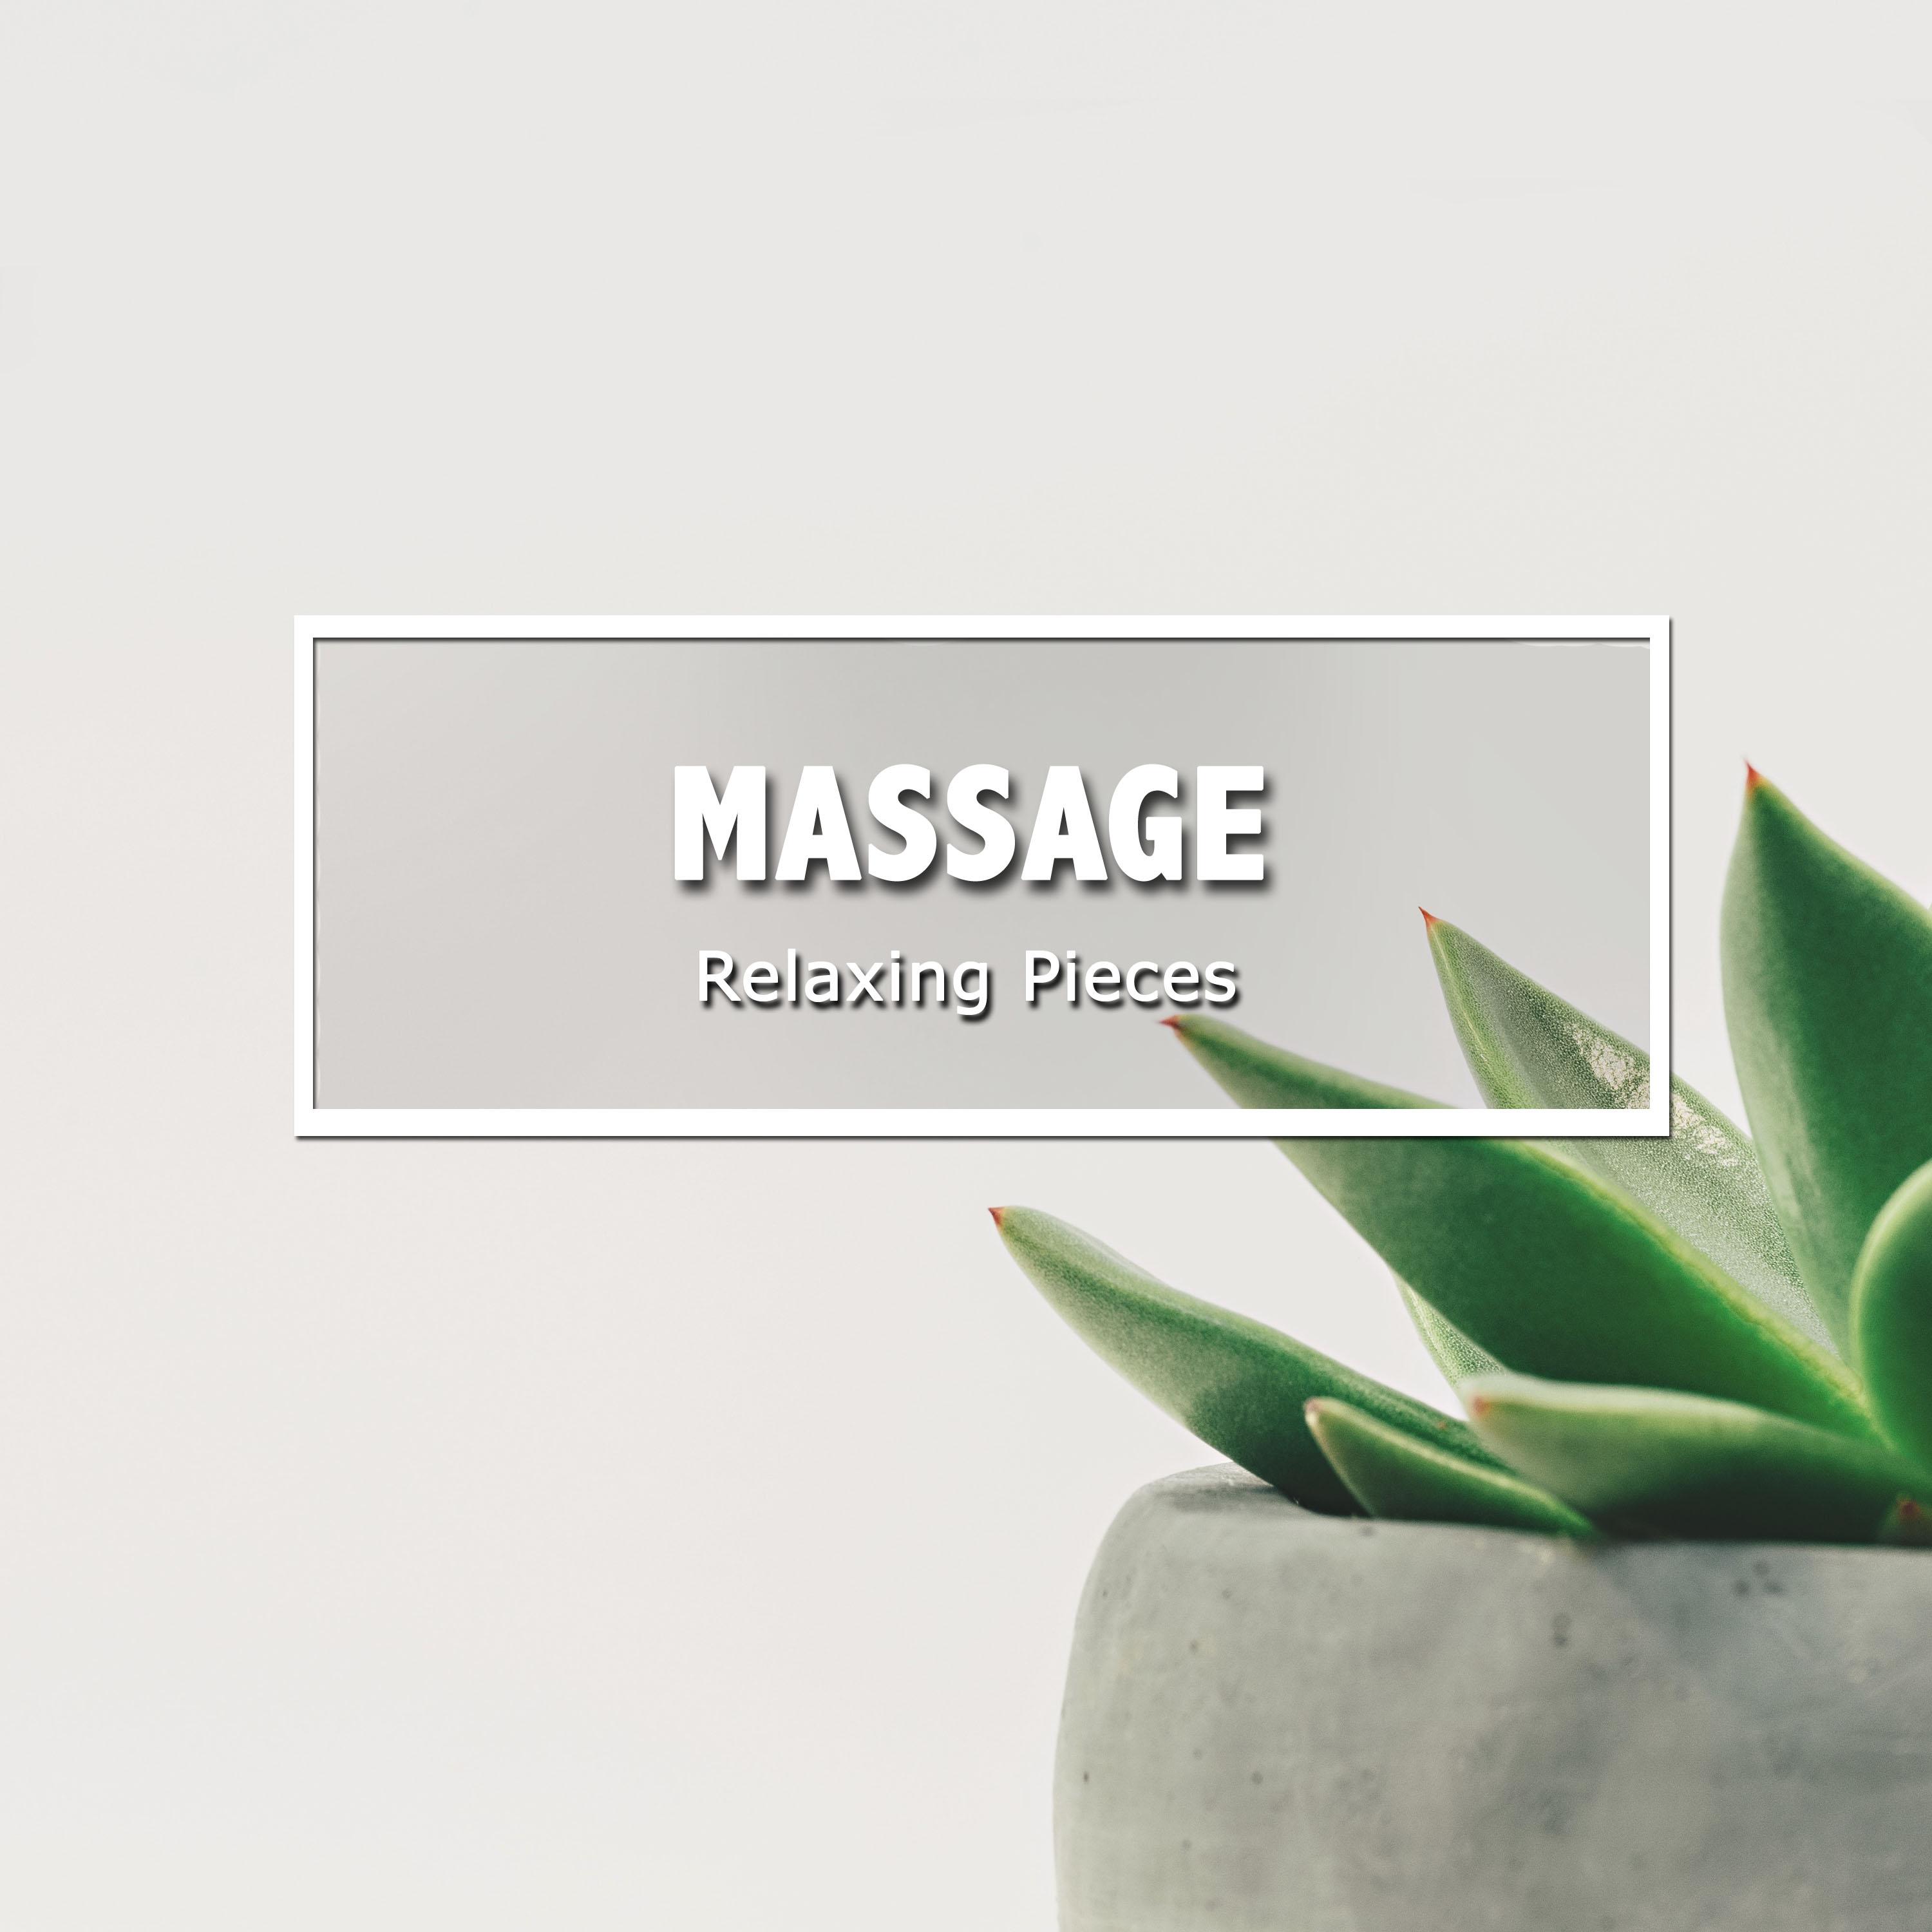 12 Massage Relaxing Pieces